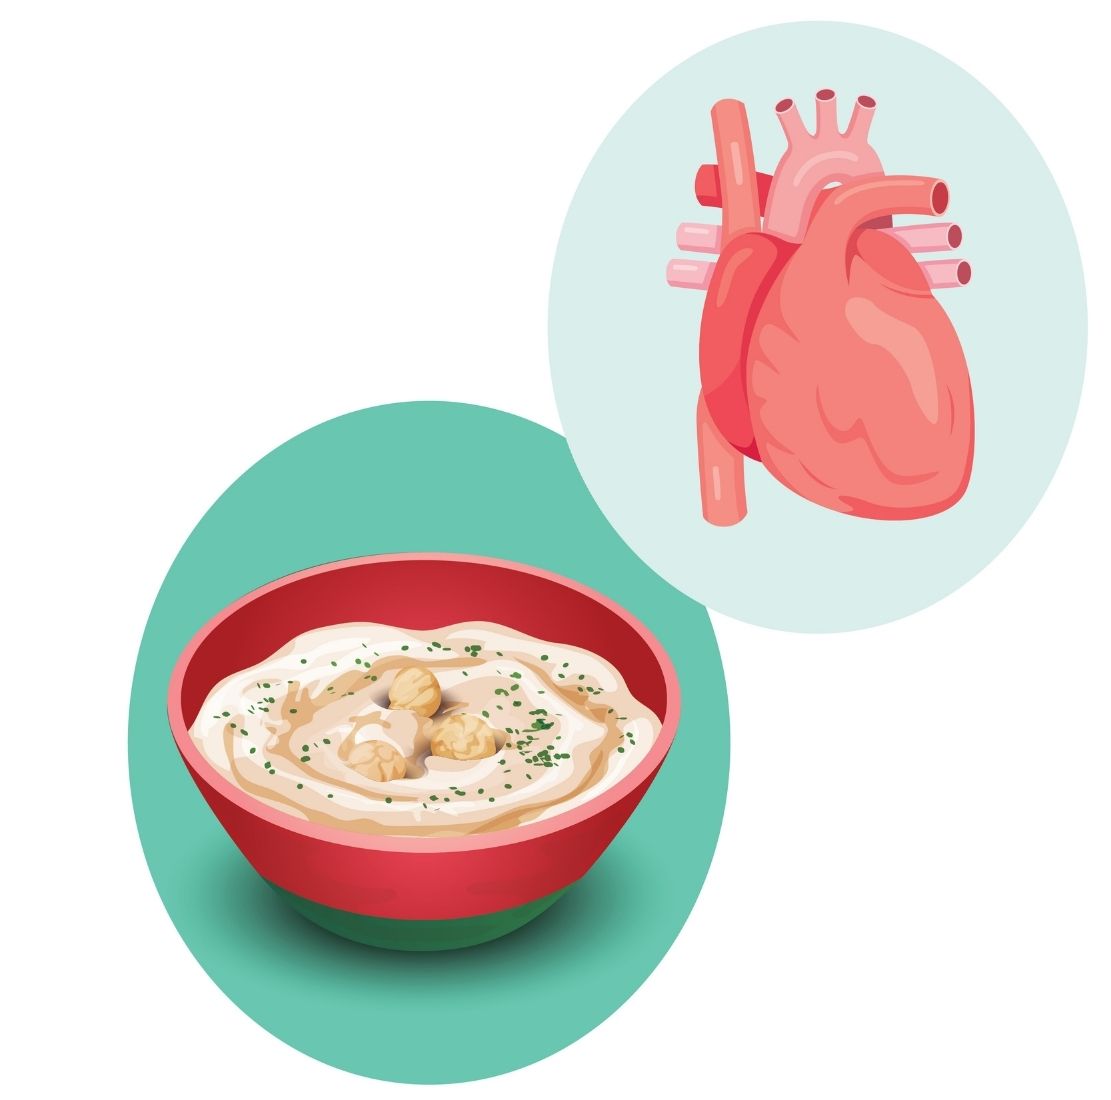 HUMMUS IMPROVES HEART CONDITIONS